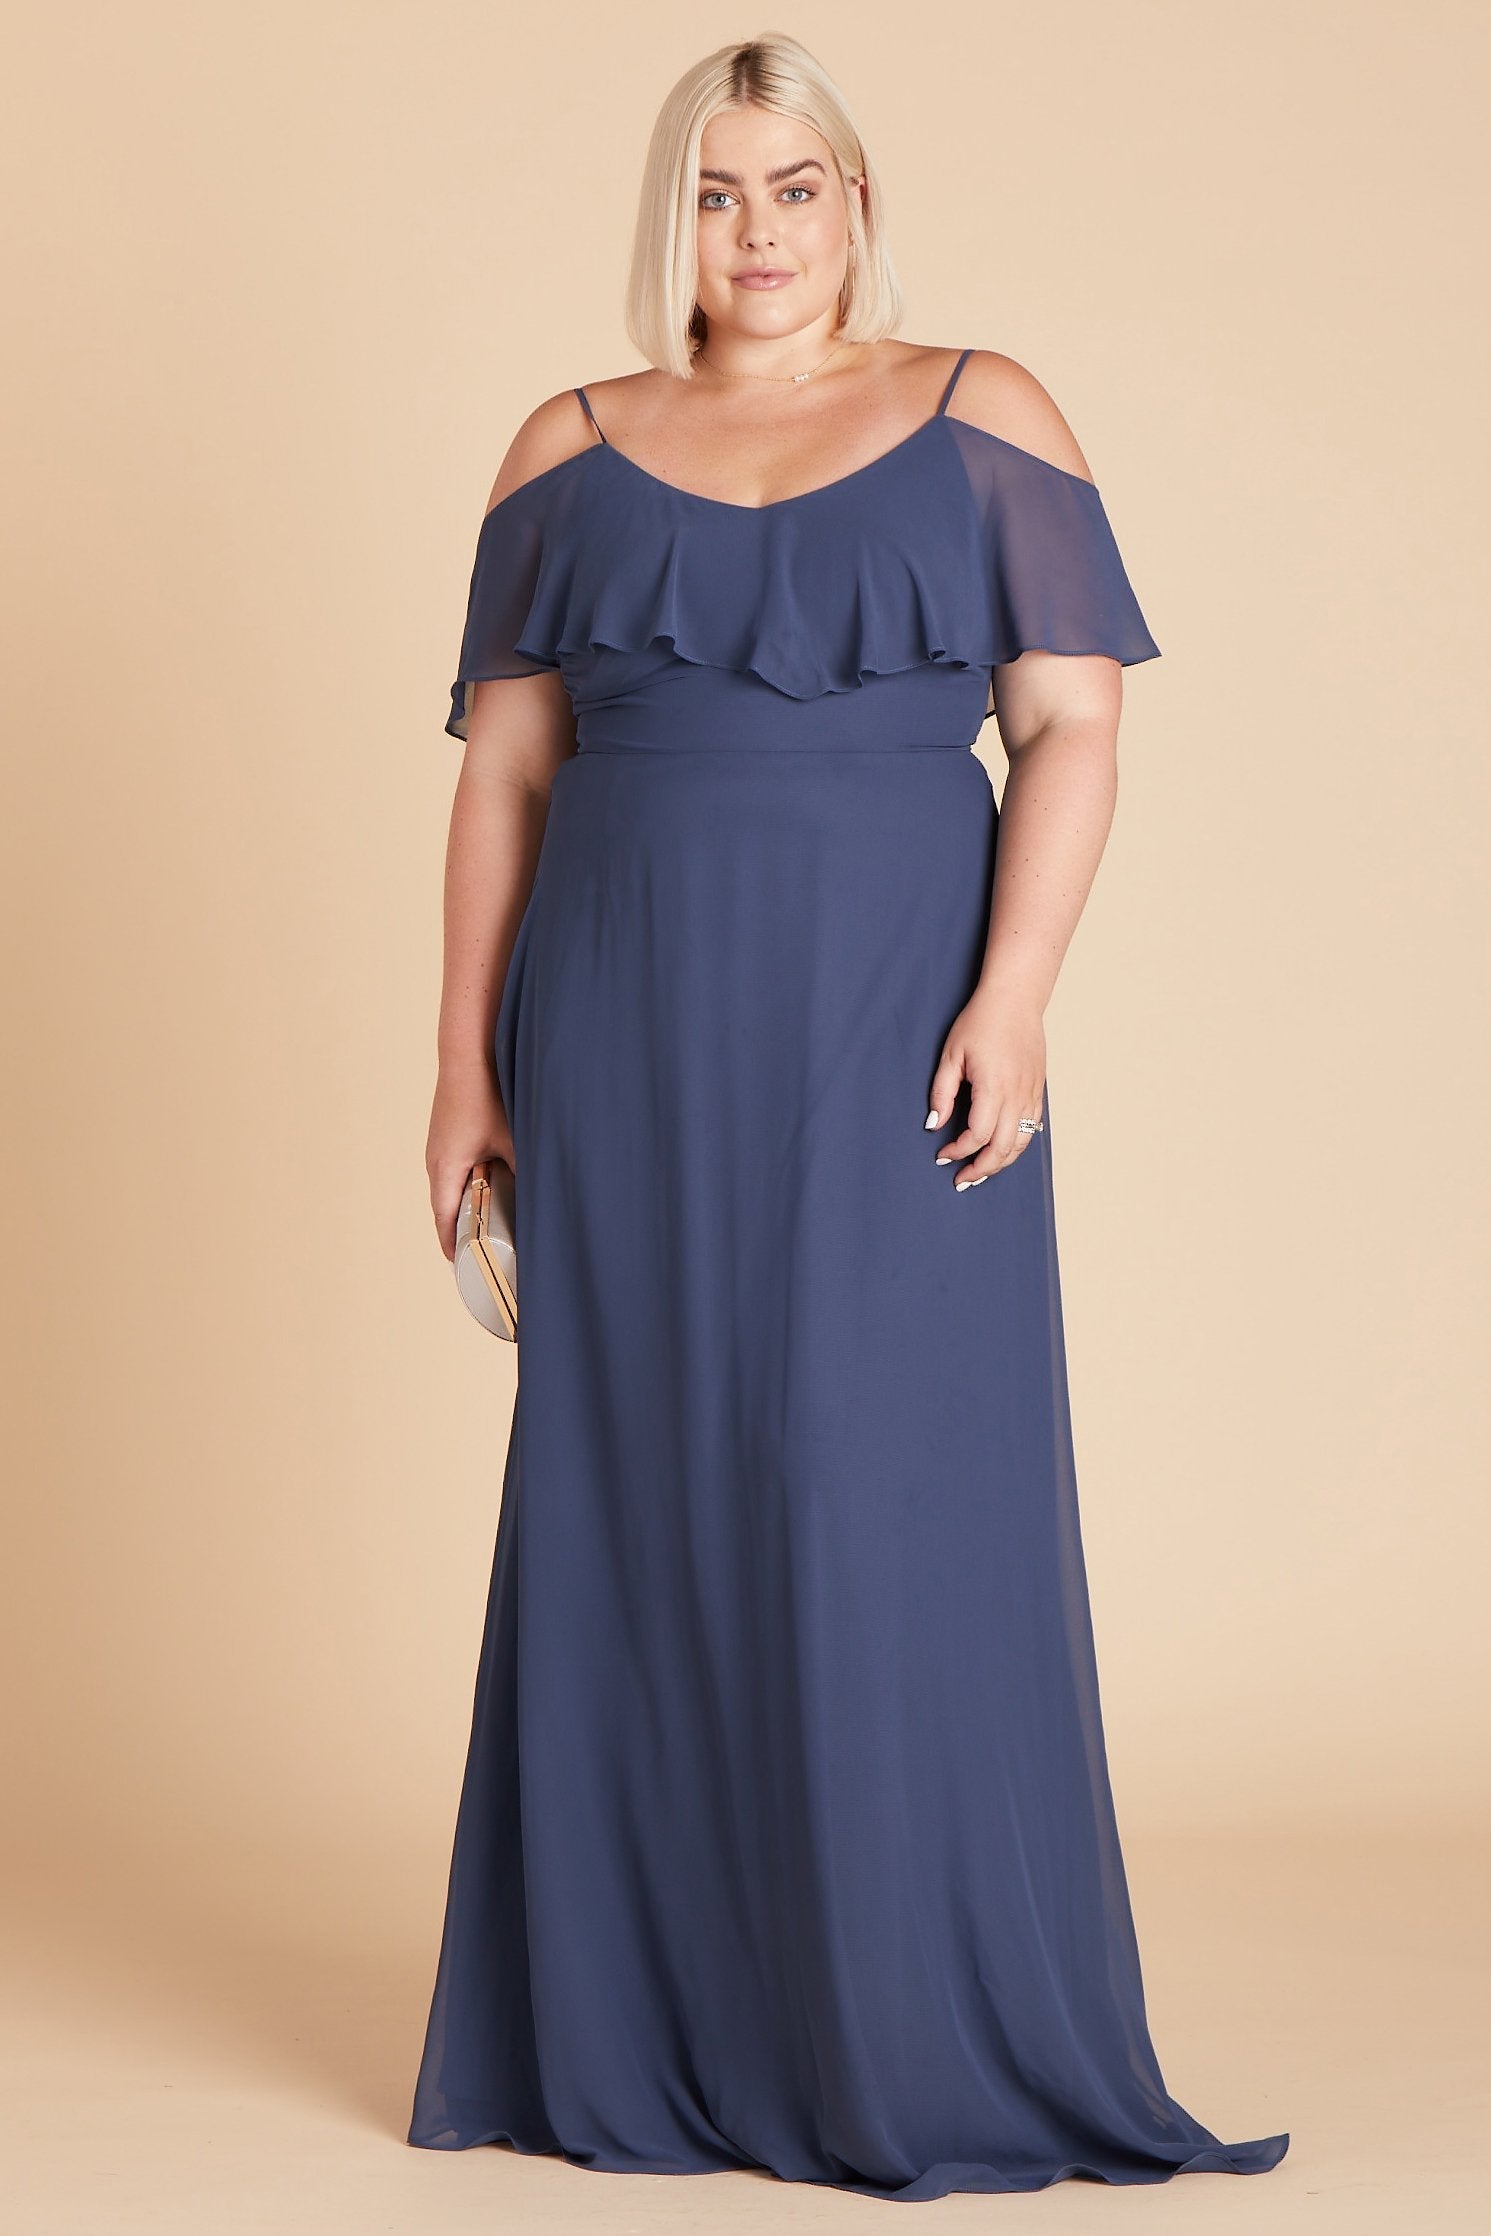 Jane convertible plus size bridesmaid dress in slate blue chiffon by Birdy Grey, front view